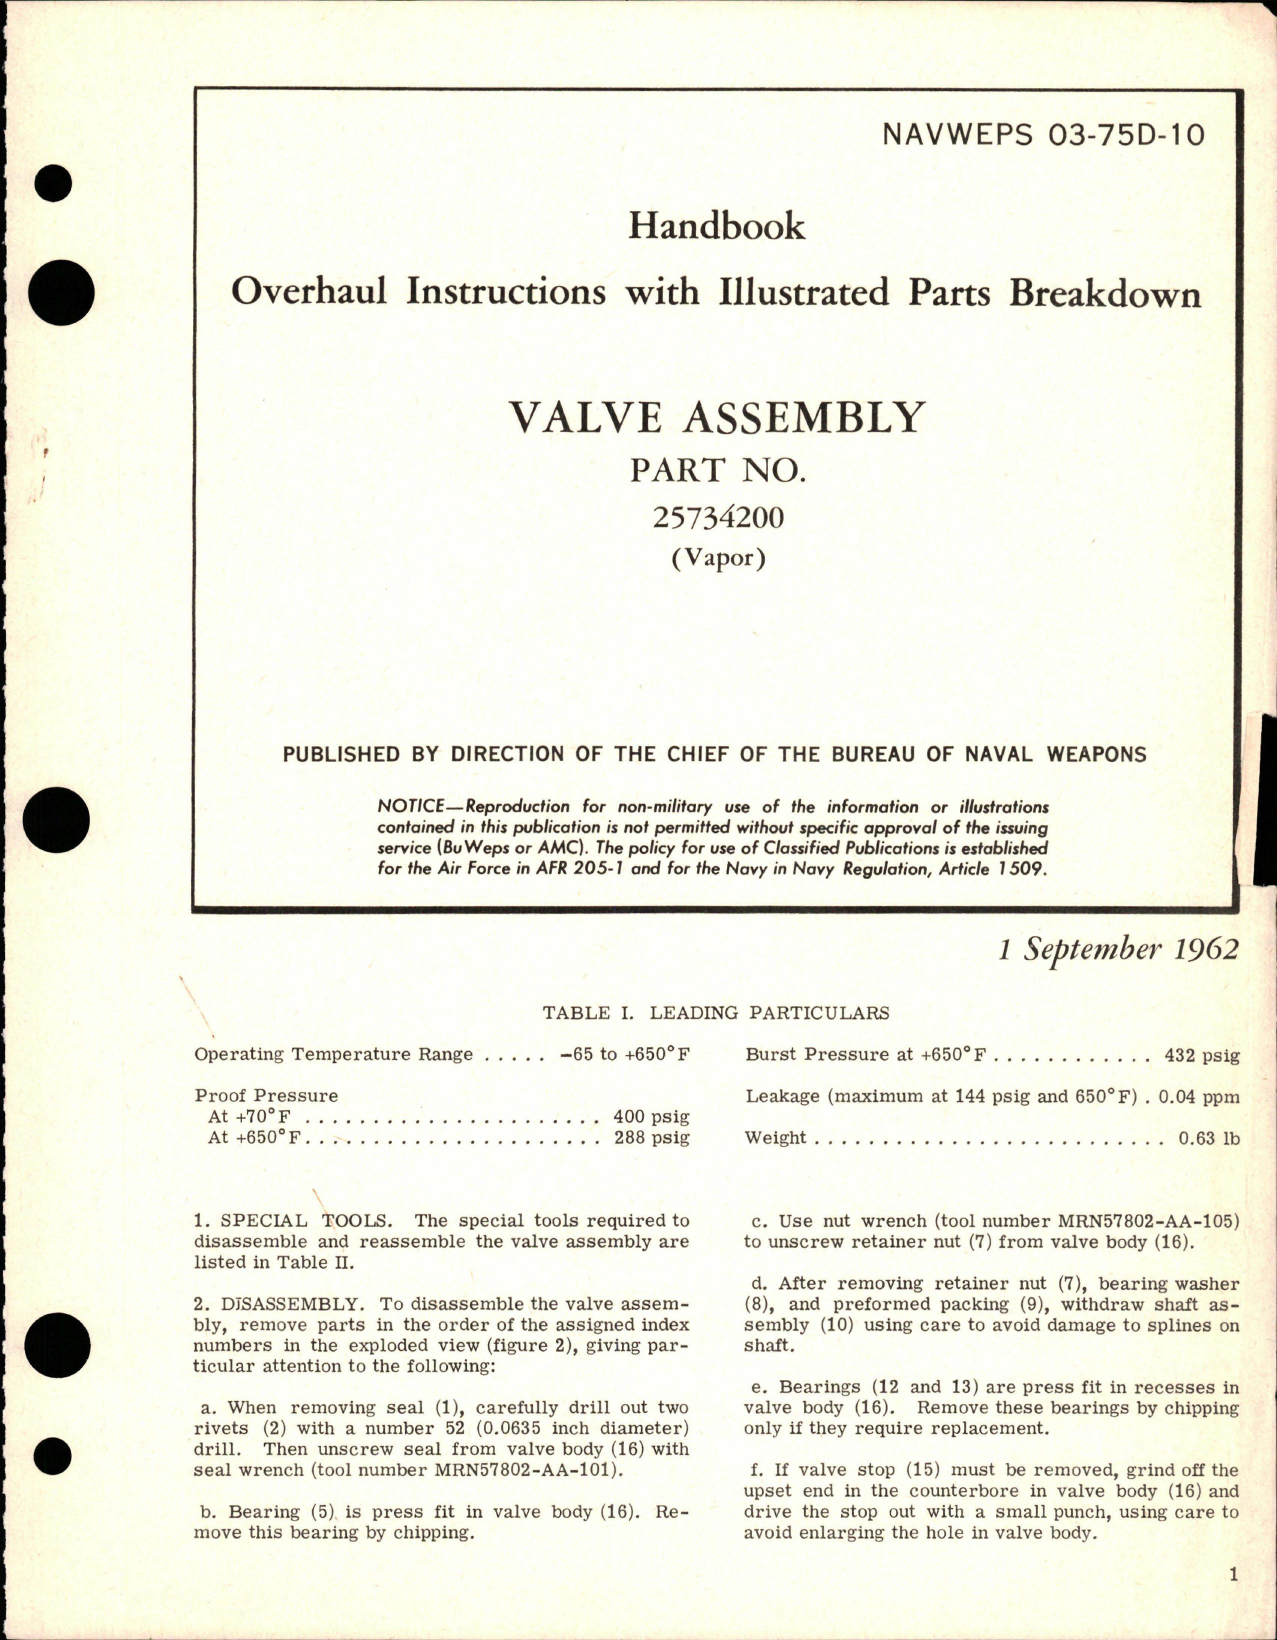 Sample page 1 from AirCorps Library document: Overhaul Instructions with Illustrated Parts Breakdown for Valve Assembly - Part 25734200